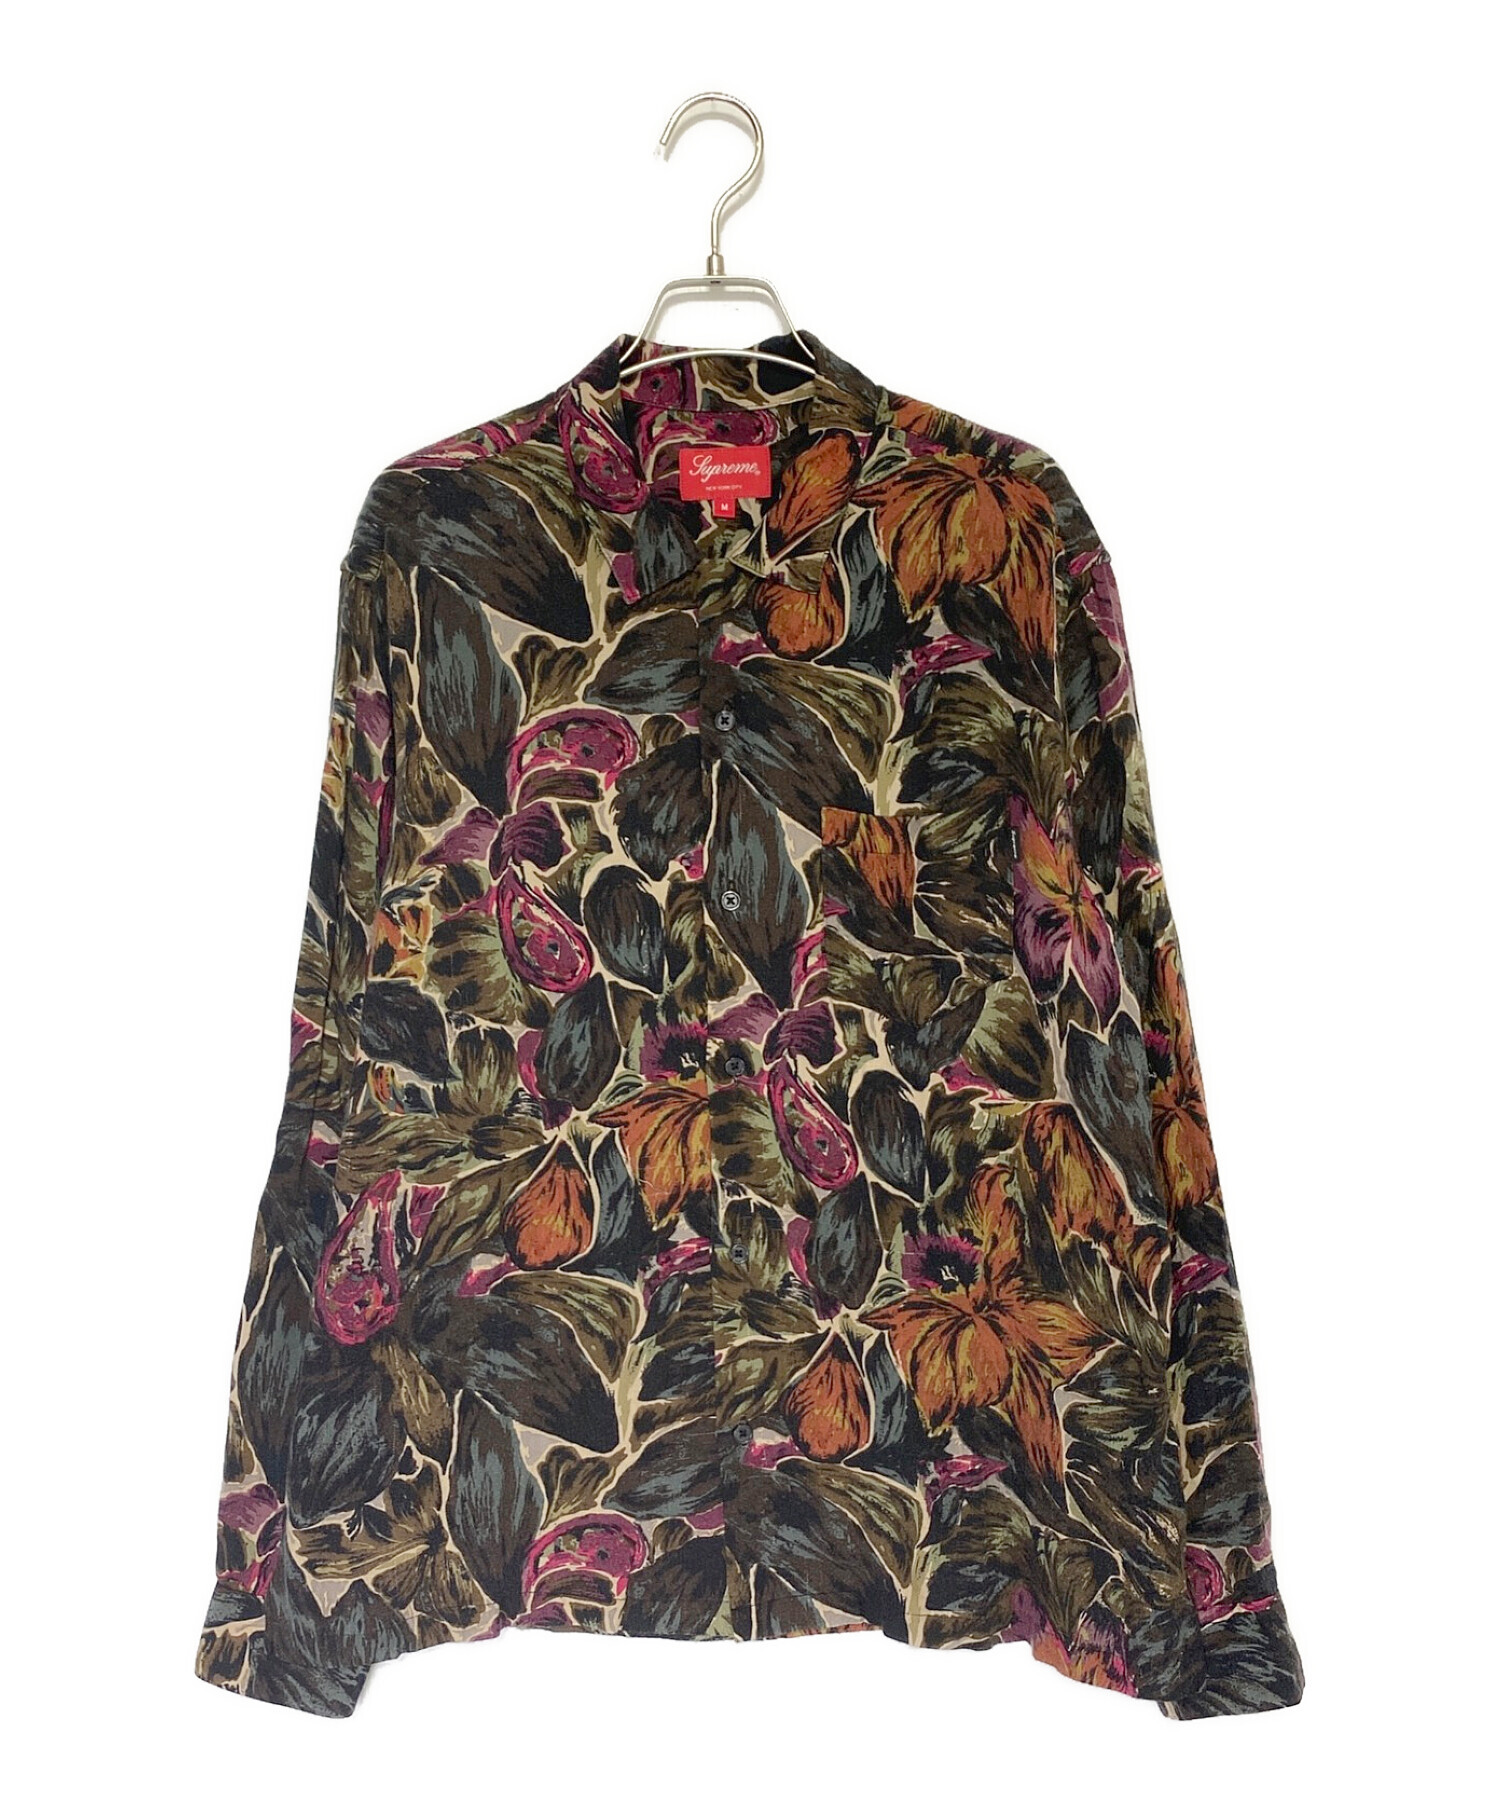 M supreme Painted Floral Rayon Shirtメンズ